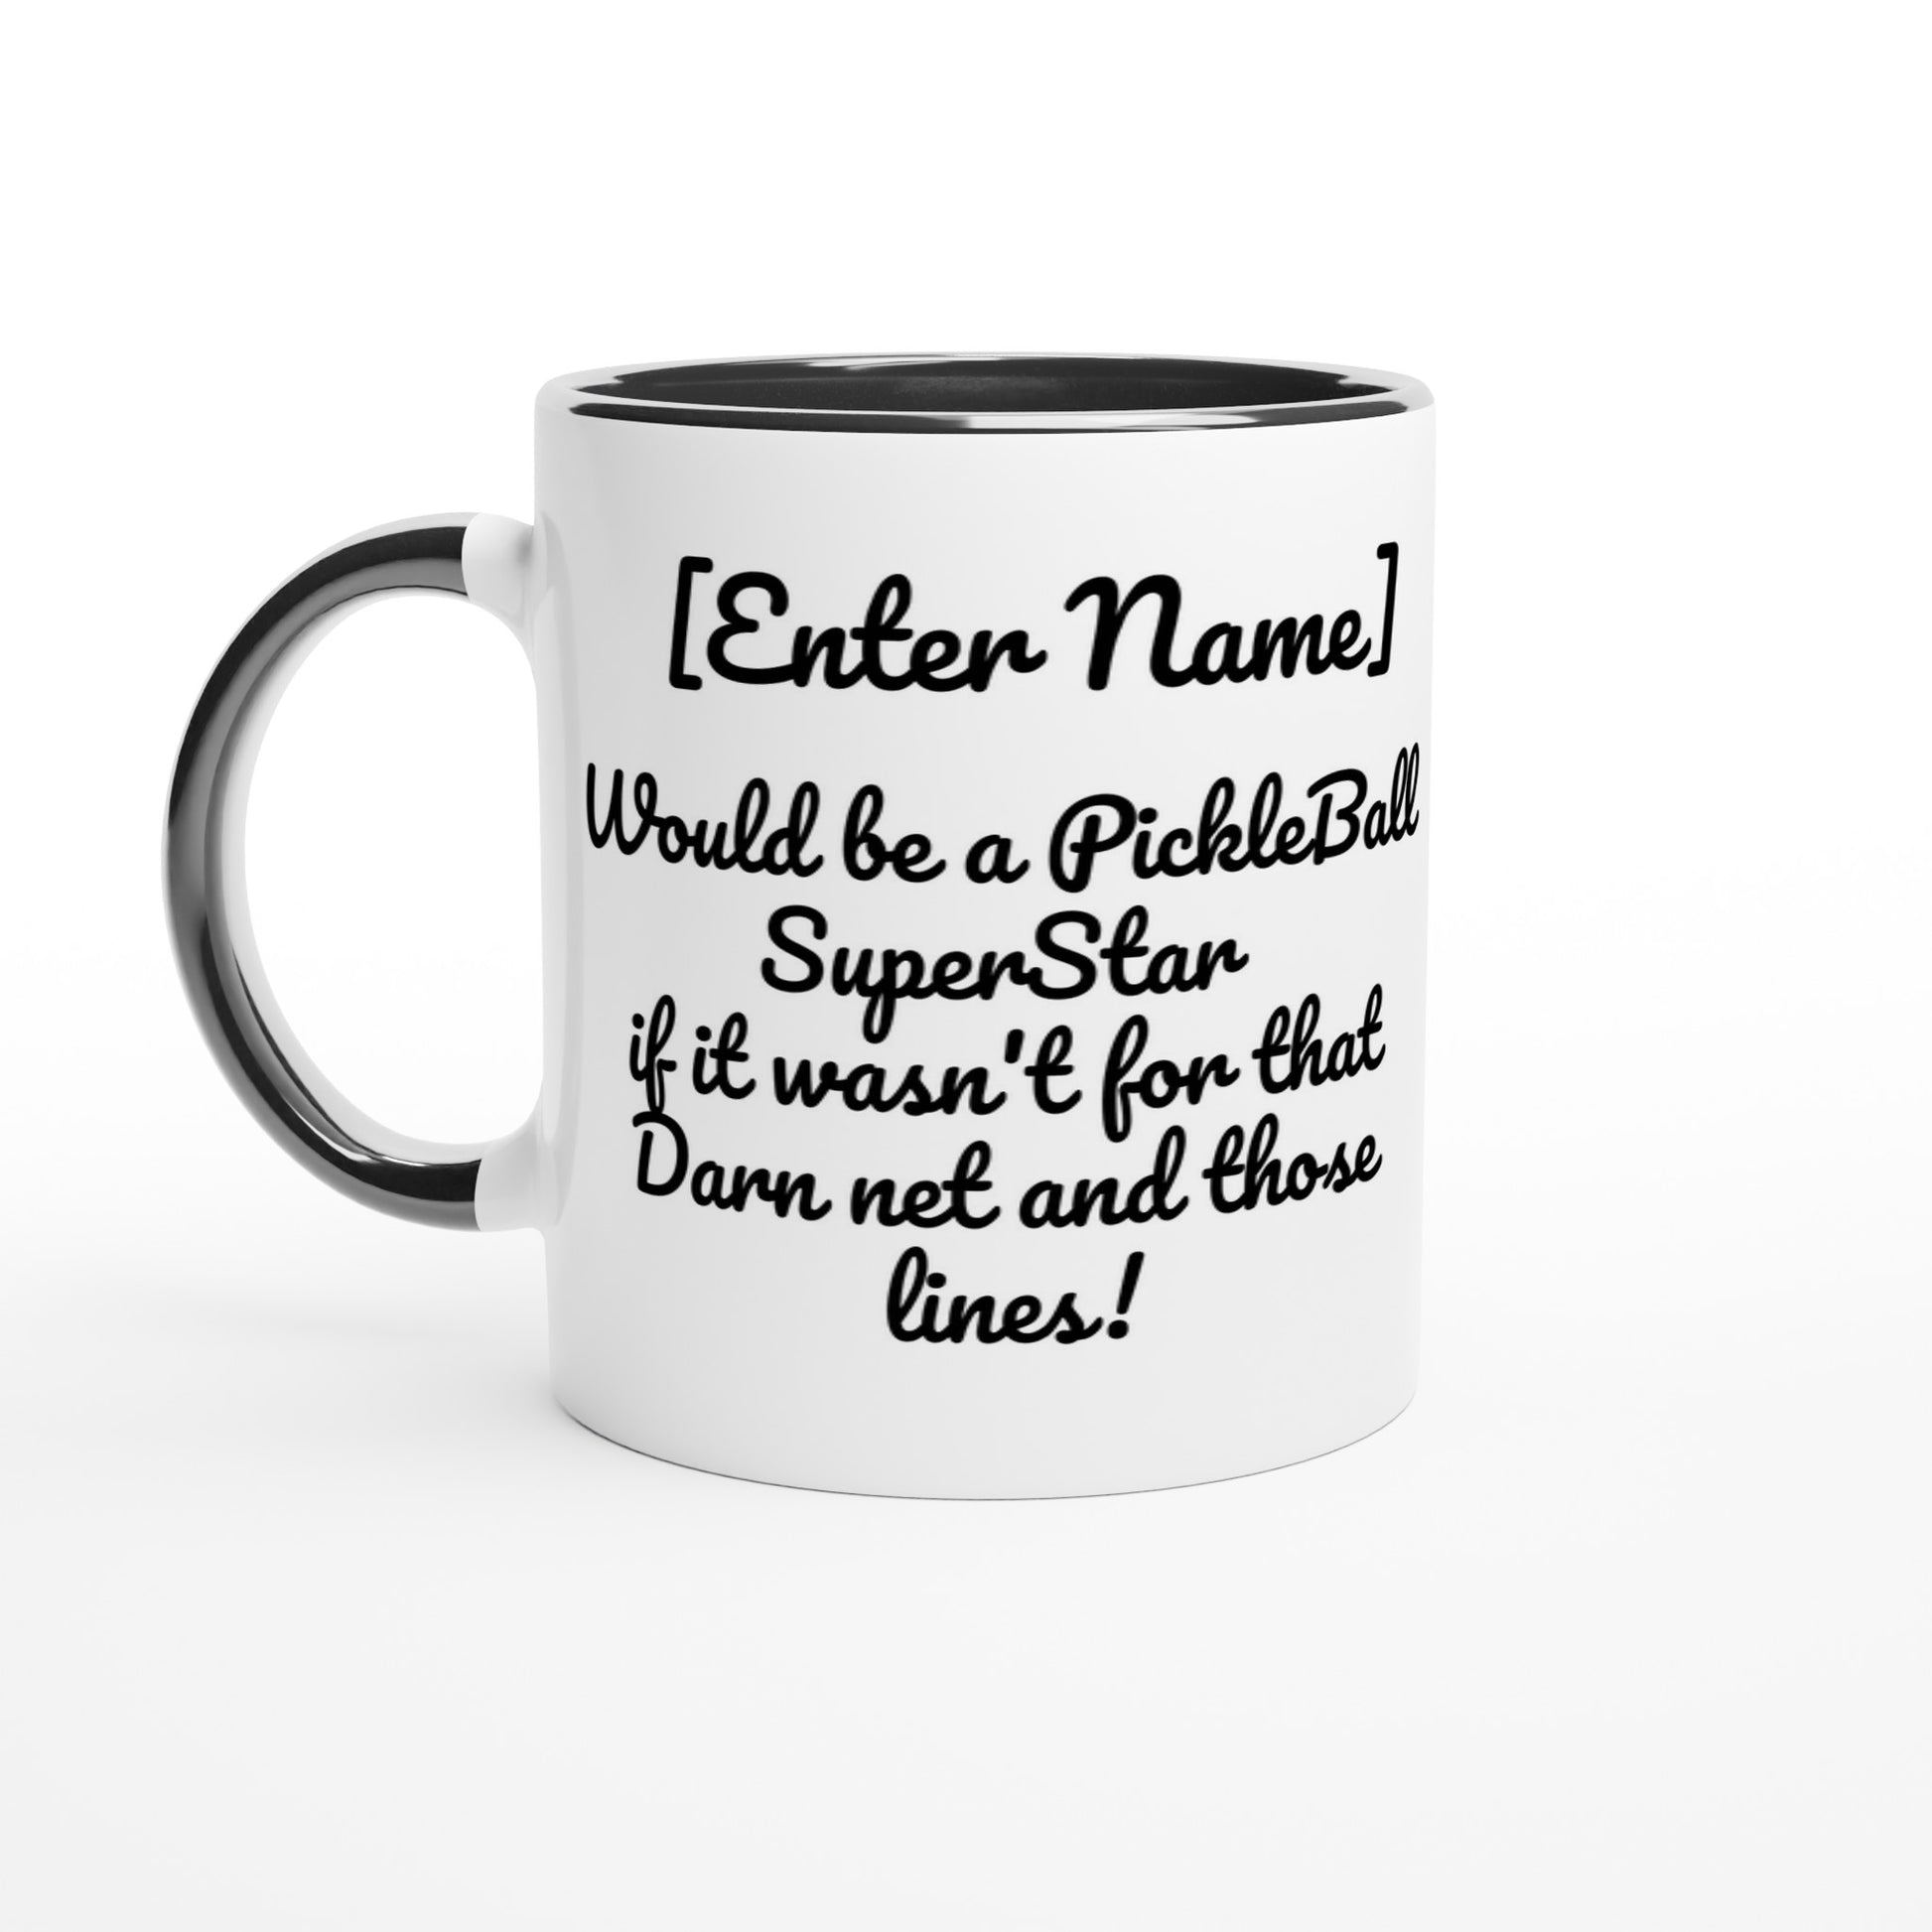 Personalized White ceramic 11oz mug with black handle Personalized with motto Your Name Would be a PickleBall Superstar if it wasn’t for that Darn net and those lines front side Let's Play PickleBall logo on back dishwasher and microwave safe ceramic coffee mug from WhatYa Say Apparel front view.